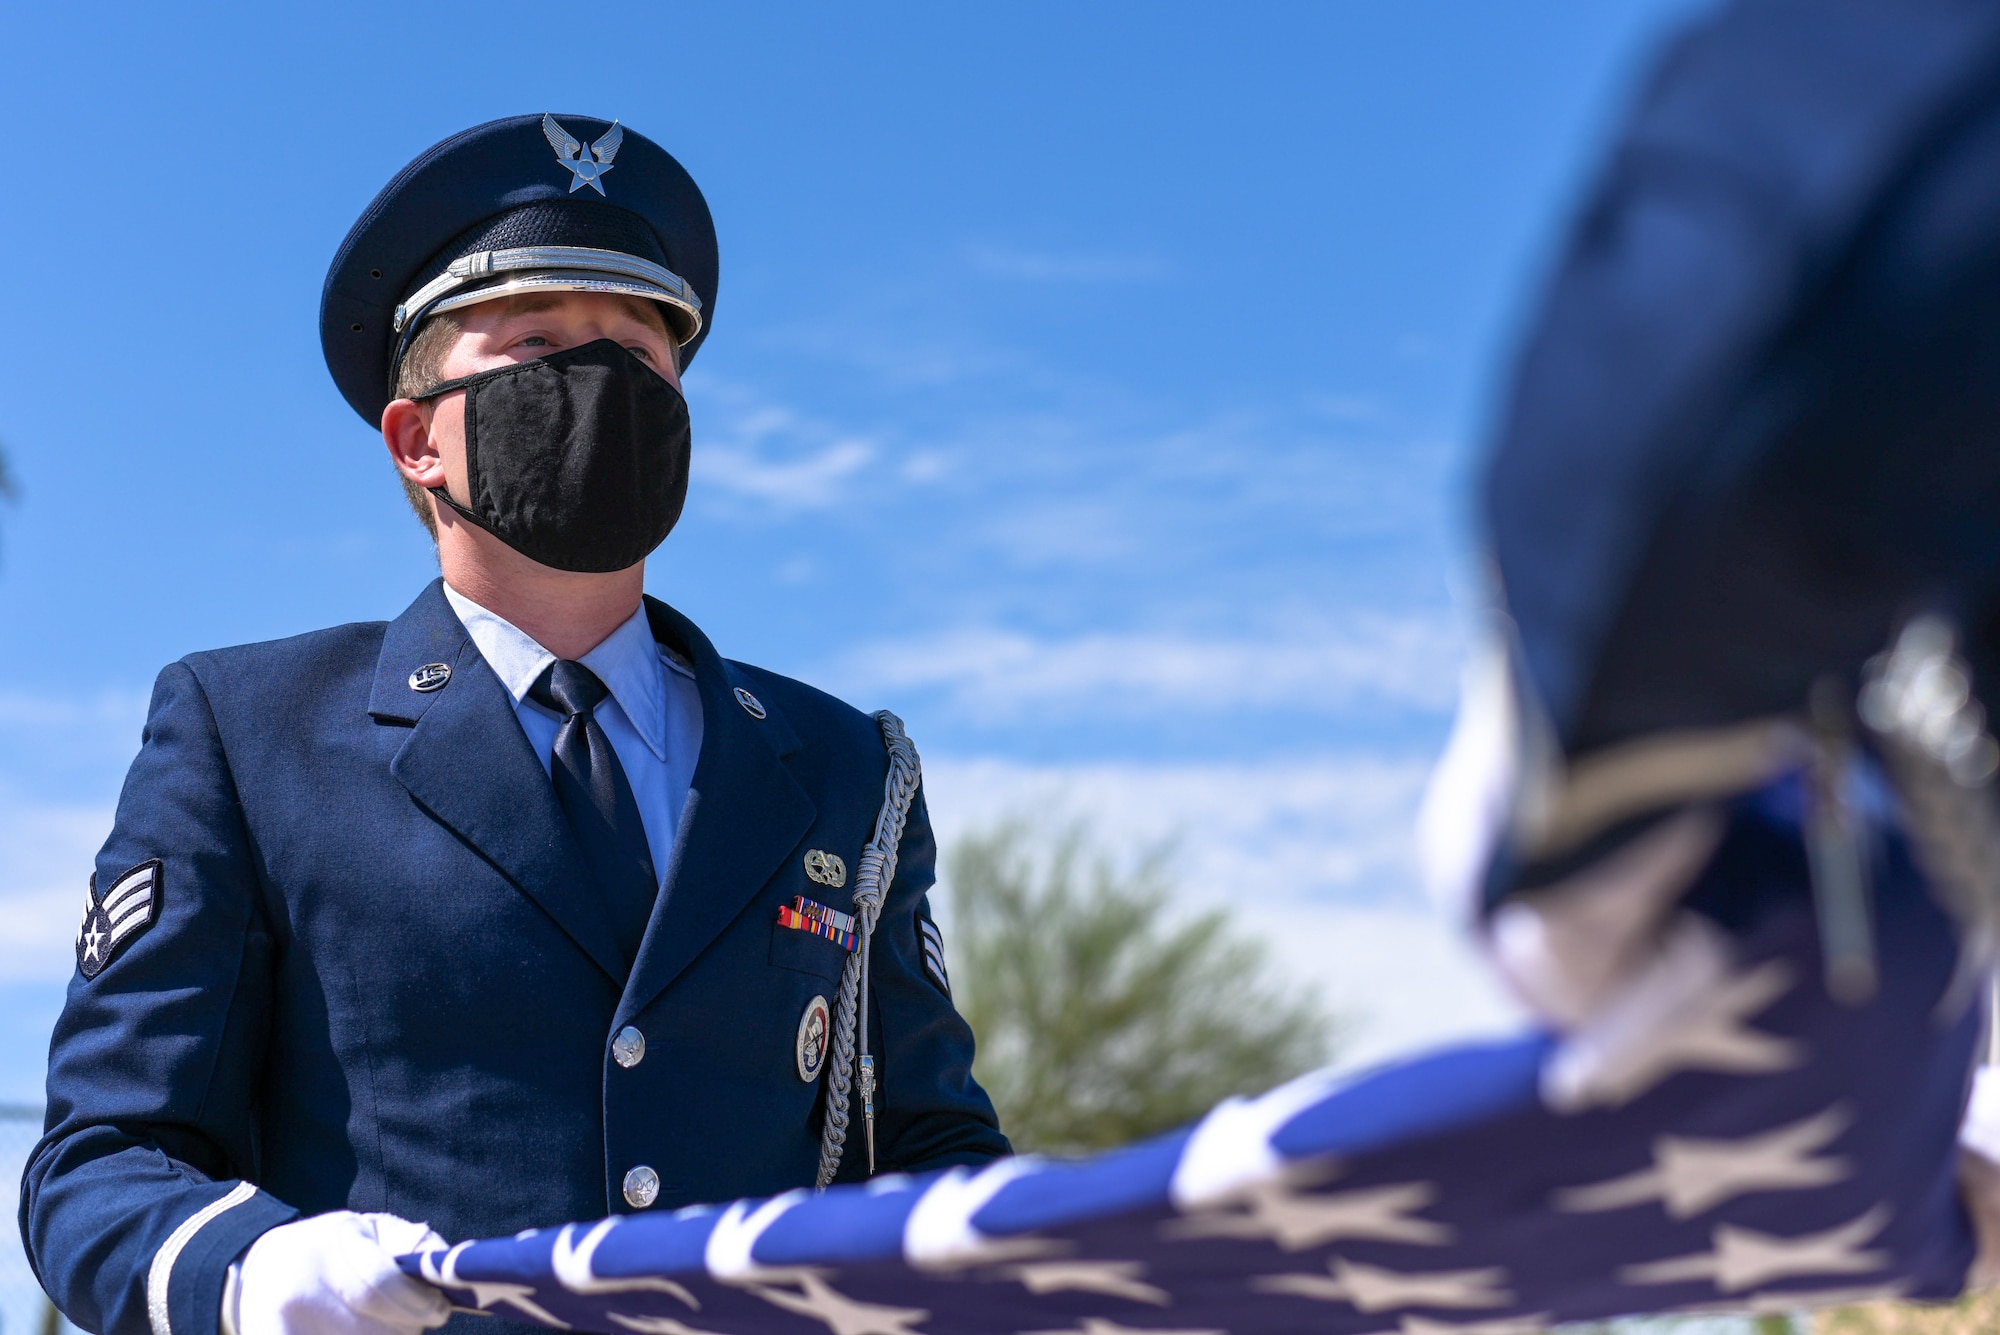 U.S. Air Force Senior Airman Blake Davidson, 56th Fighter Wing ceremonial guardsman, holds the American flag during a flag folding ceremony July 28, 2021, at Luke Air Force Base, Arizona. The Luke AFB Honor Guard is responsible for a large amount of Arizona’s ceremonies, providing coverage to six different counties. The base honor guard’s primary mission is to provide military funeral honors for active-duty members as well as retirees and veterans who served honorably in the U.S. Air Force and Army Air Corps. (U.S. Air Force photo by Senior Airman Caleb F. Butler)